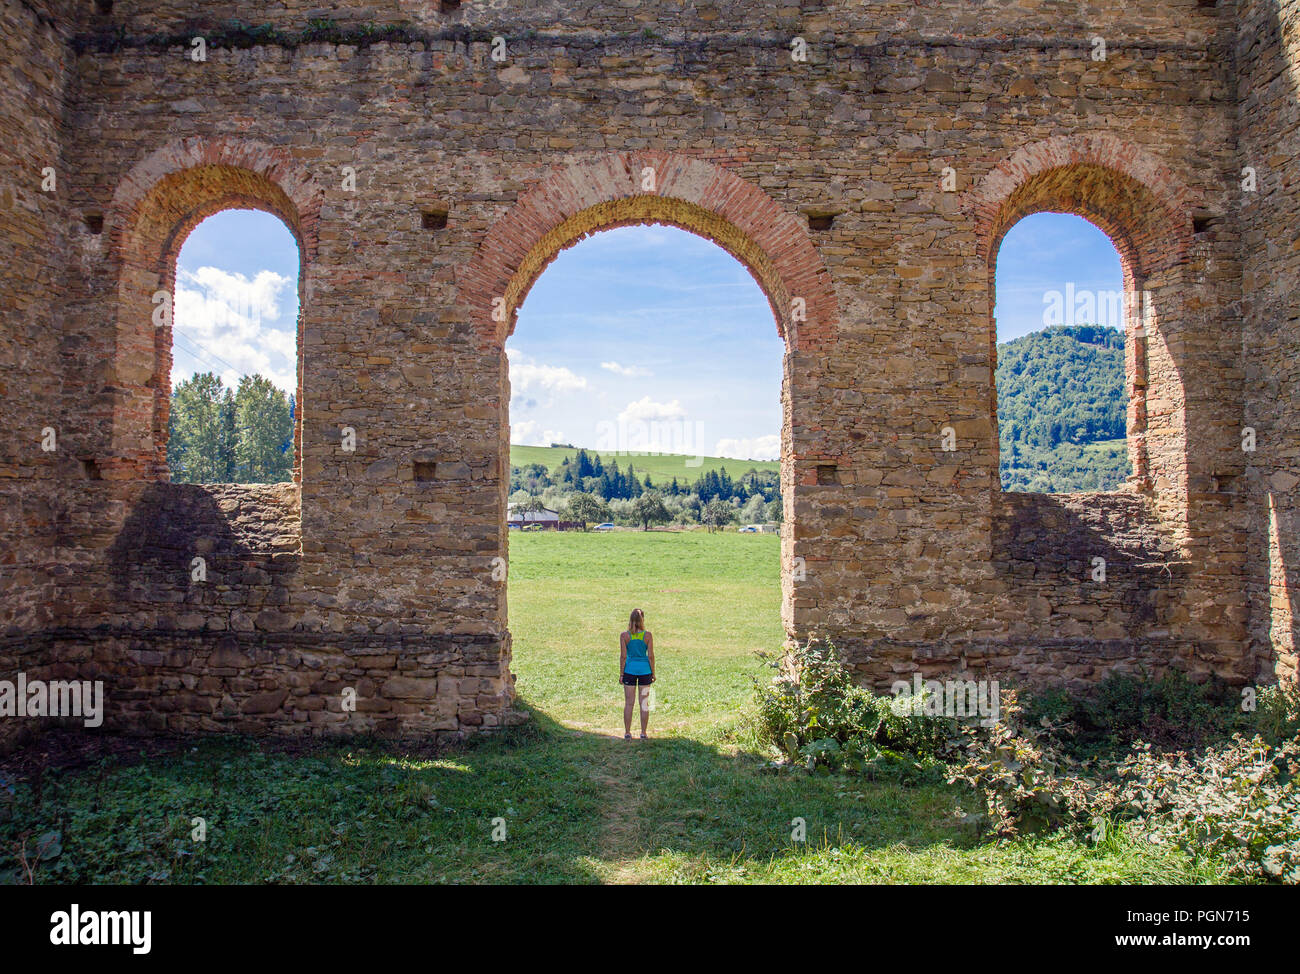 A traveler standing in a ruined arc, Orava, Slovakia. Stock Photo